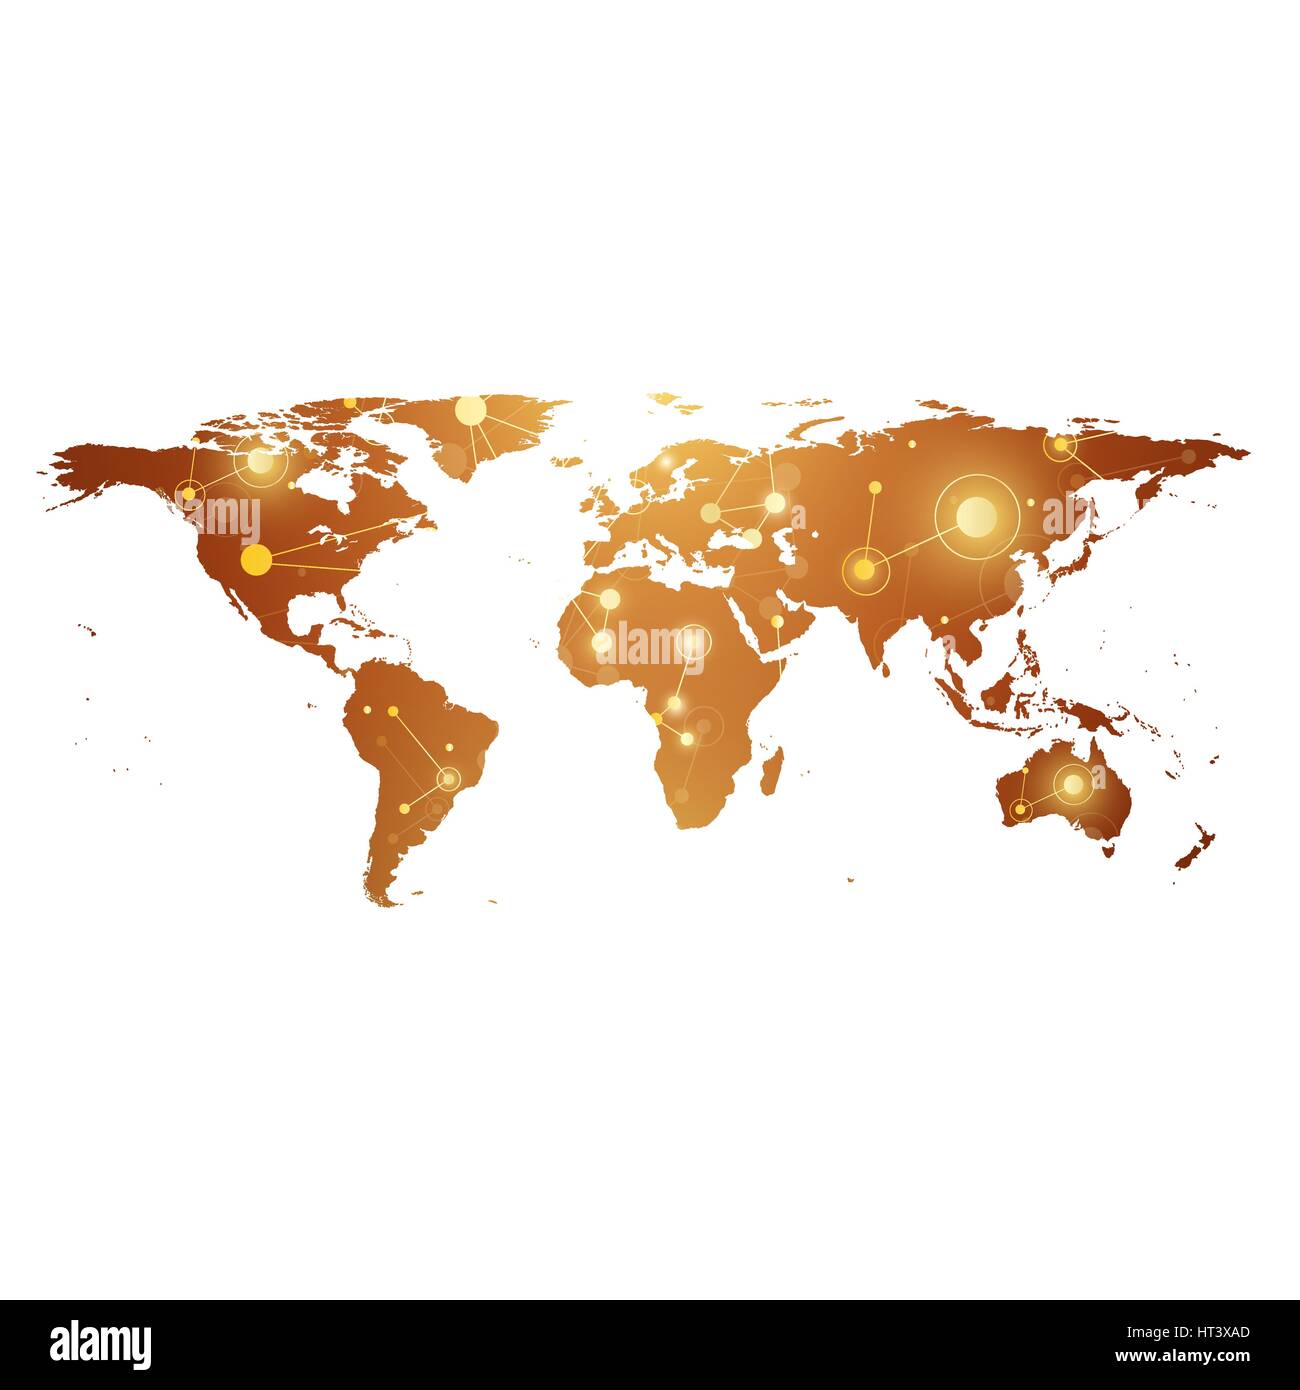 Golden Political World Map with global technology networking concept. Digital data visualization. Scientific cybernetic particle compounds. Big Data background communication. Vector illustration. Stock Vector